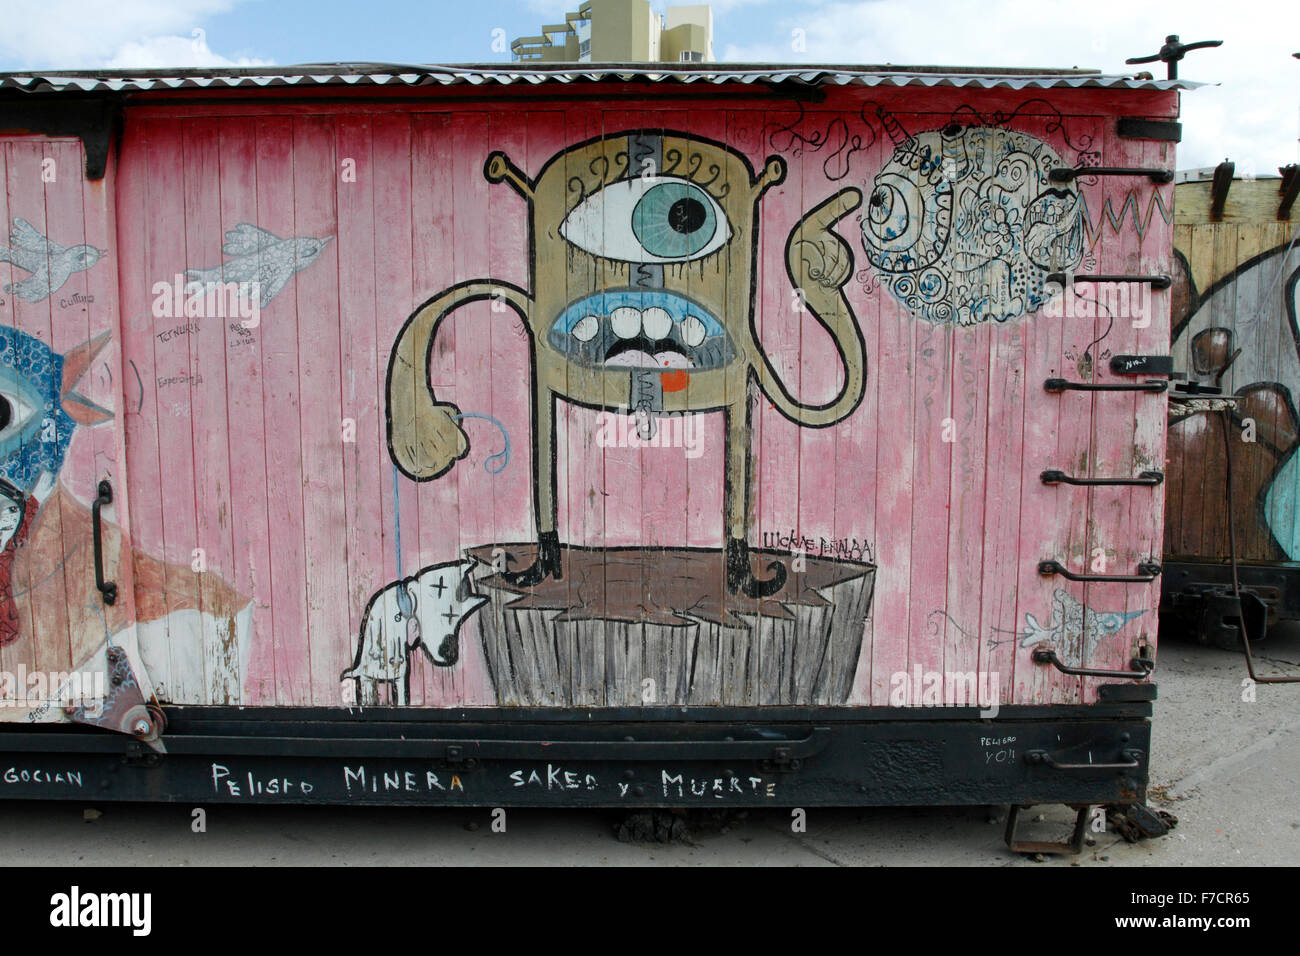 Old Train carriages in Puerto Madryn, Chubut, Argentina which have street art of Graffiti on them. Stock Photo